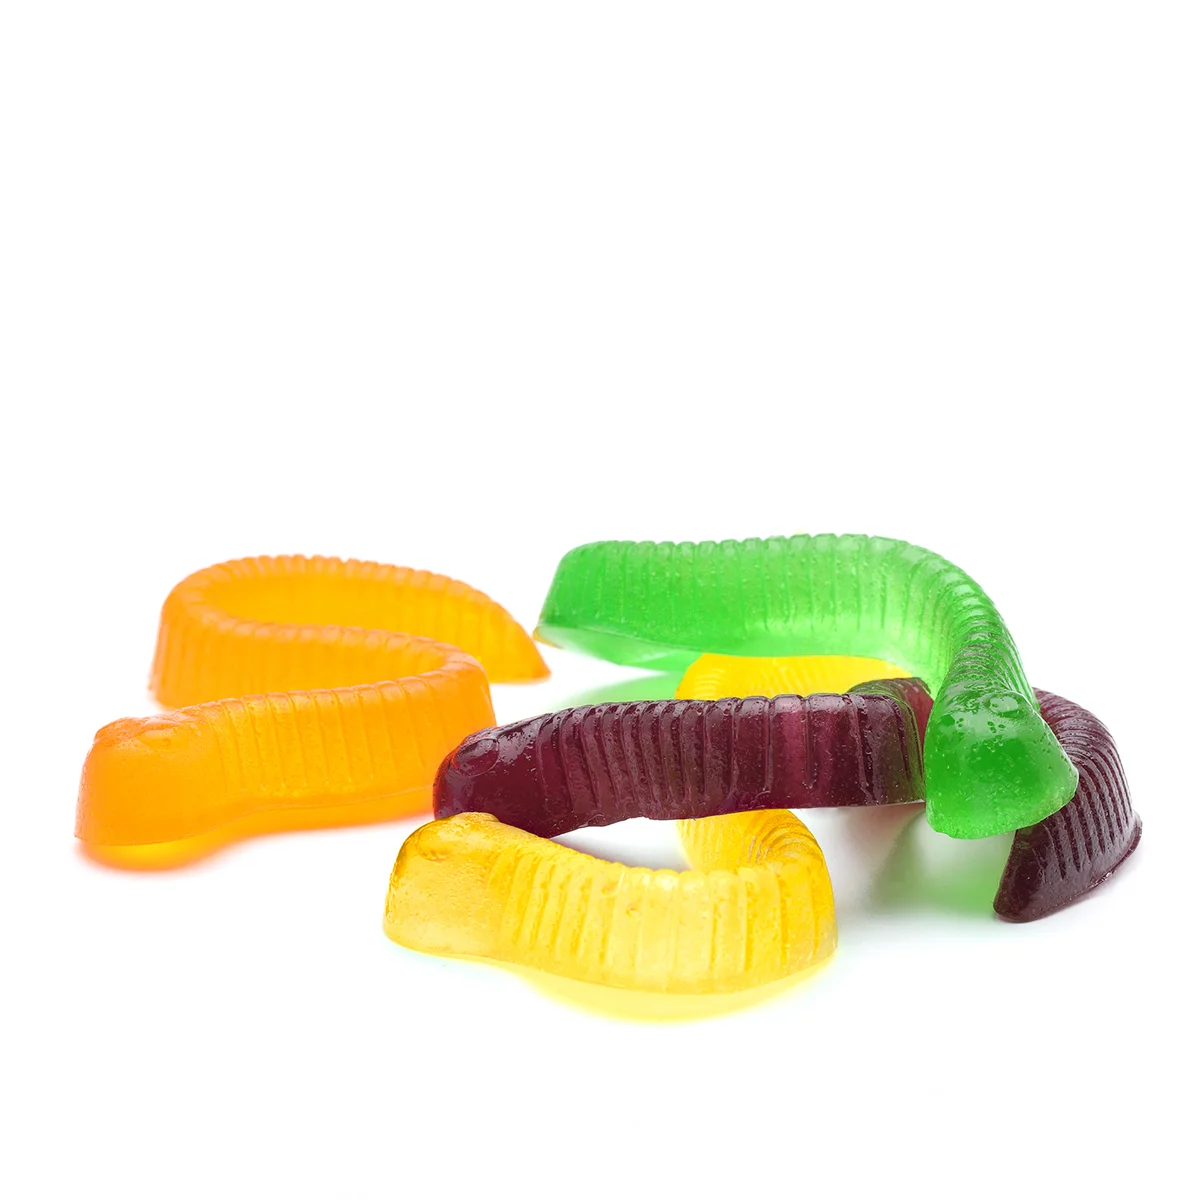 Medicated Edibles Gummy Worms